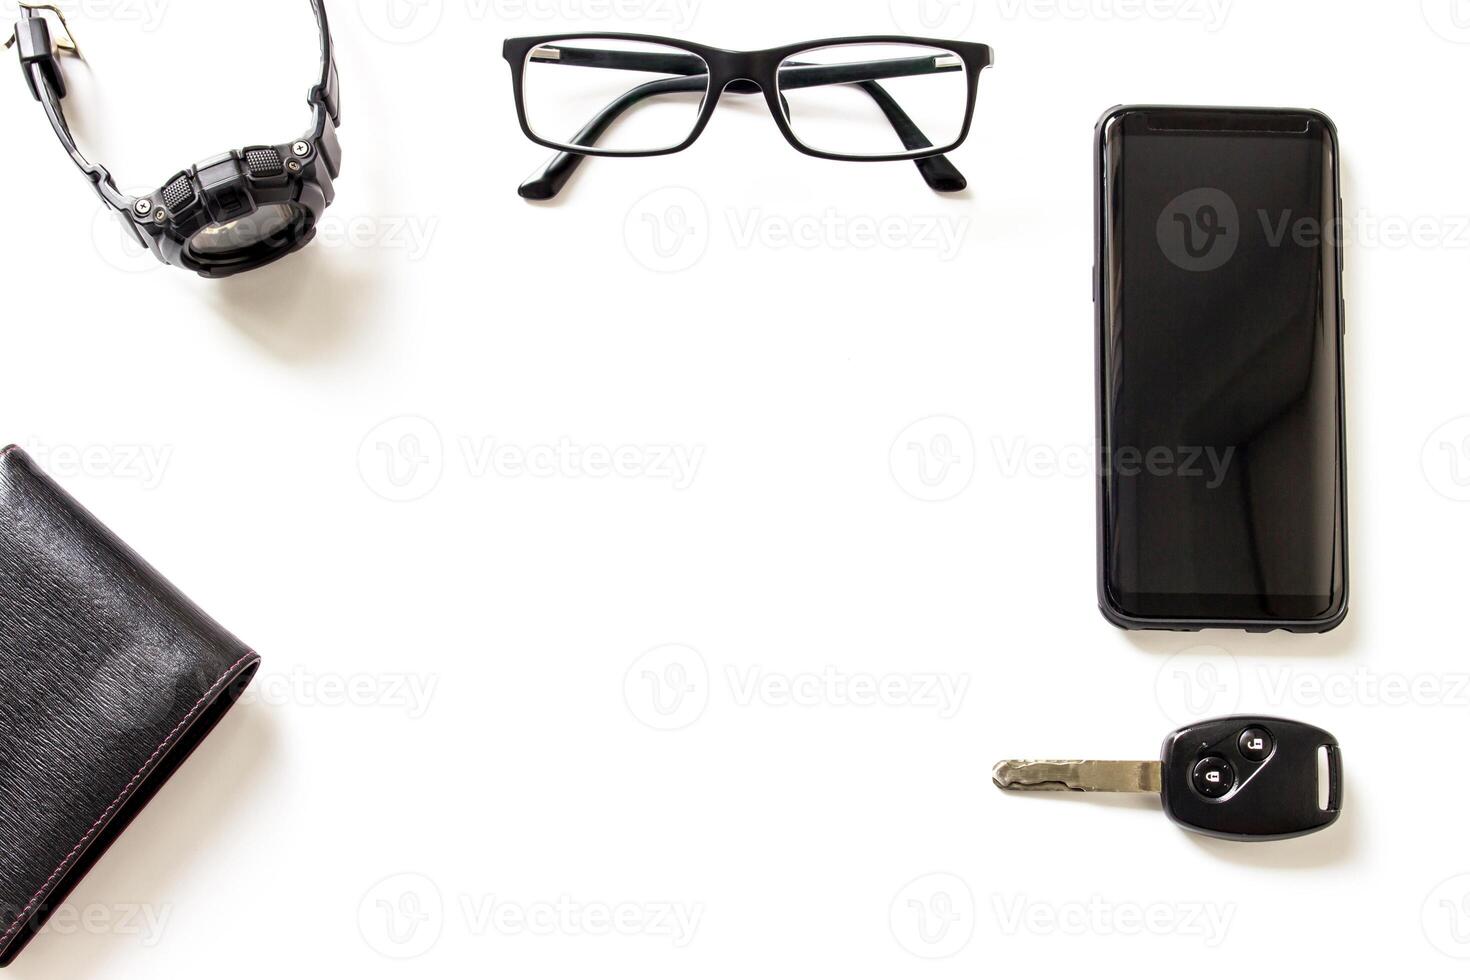 Glasses smart phone car key Watch wallet on the white background floor Holiday concept Travel Accessories and space for texture photo